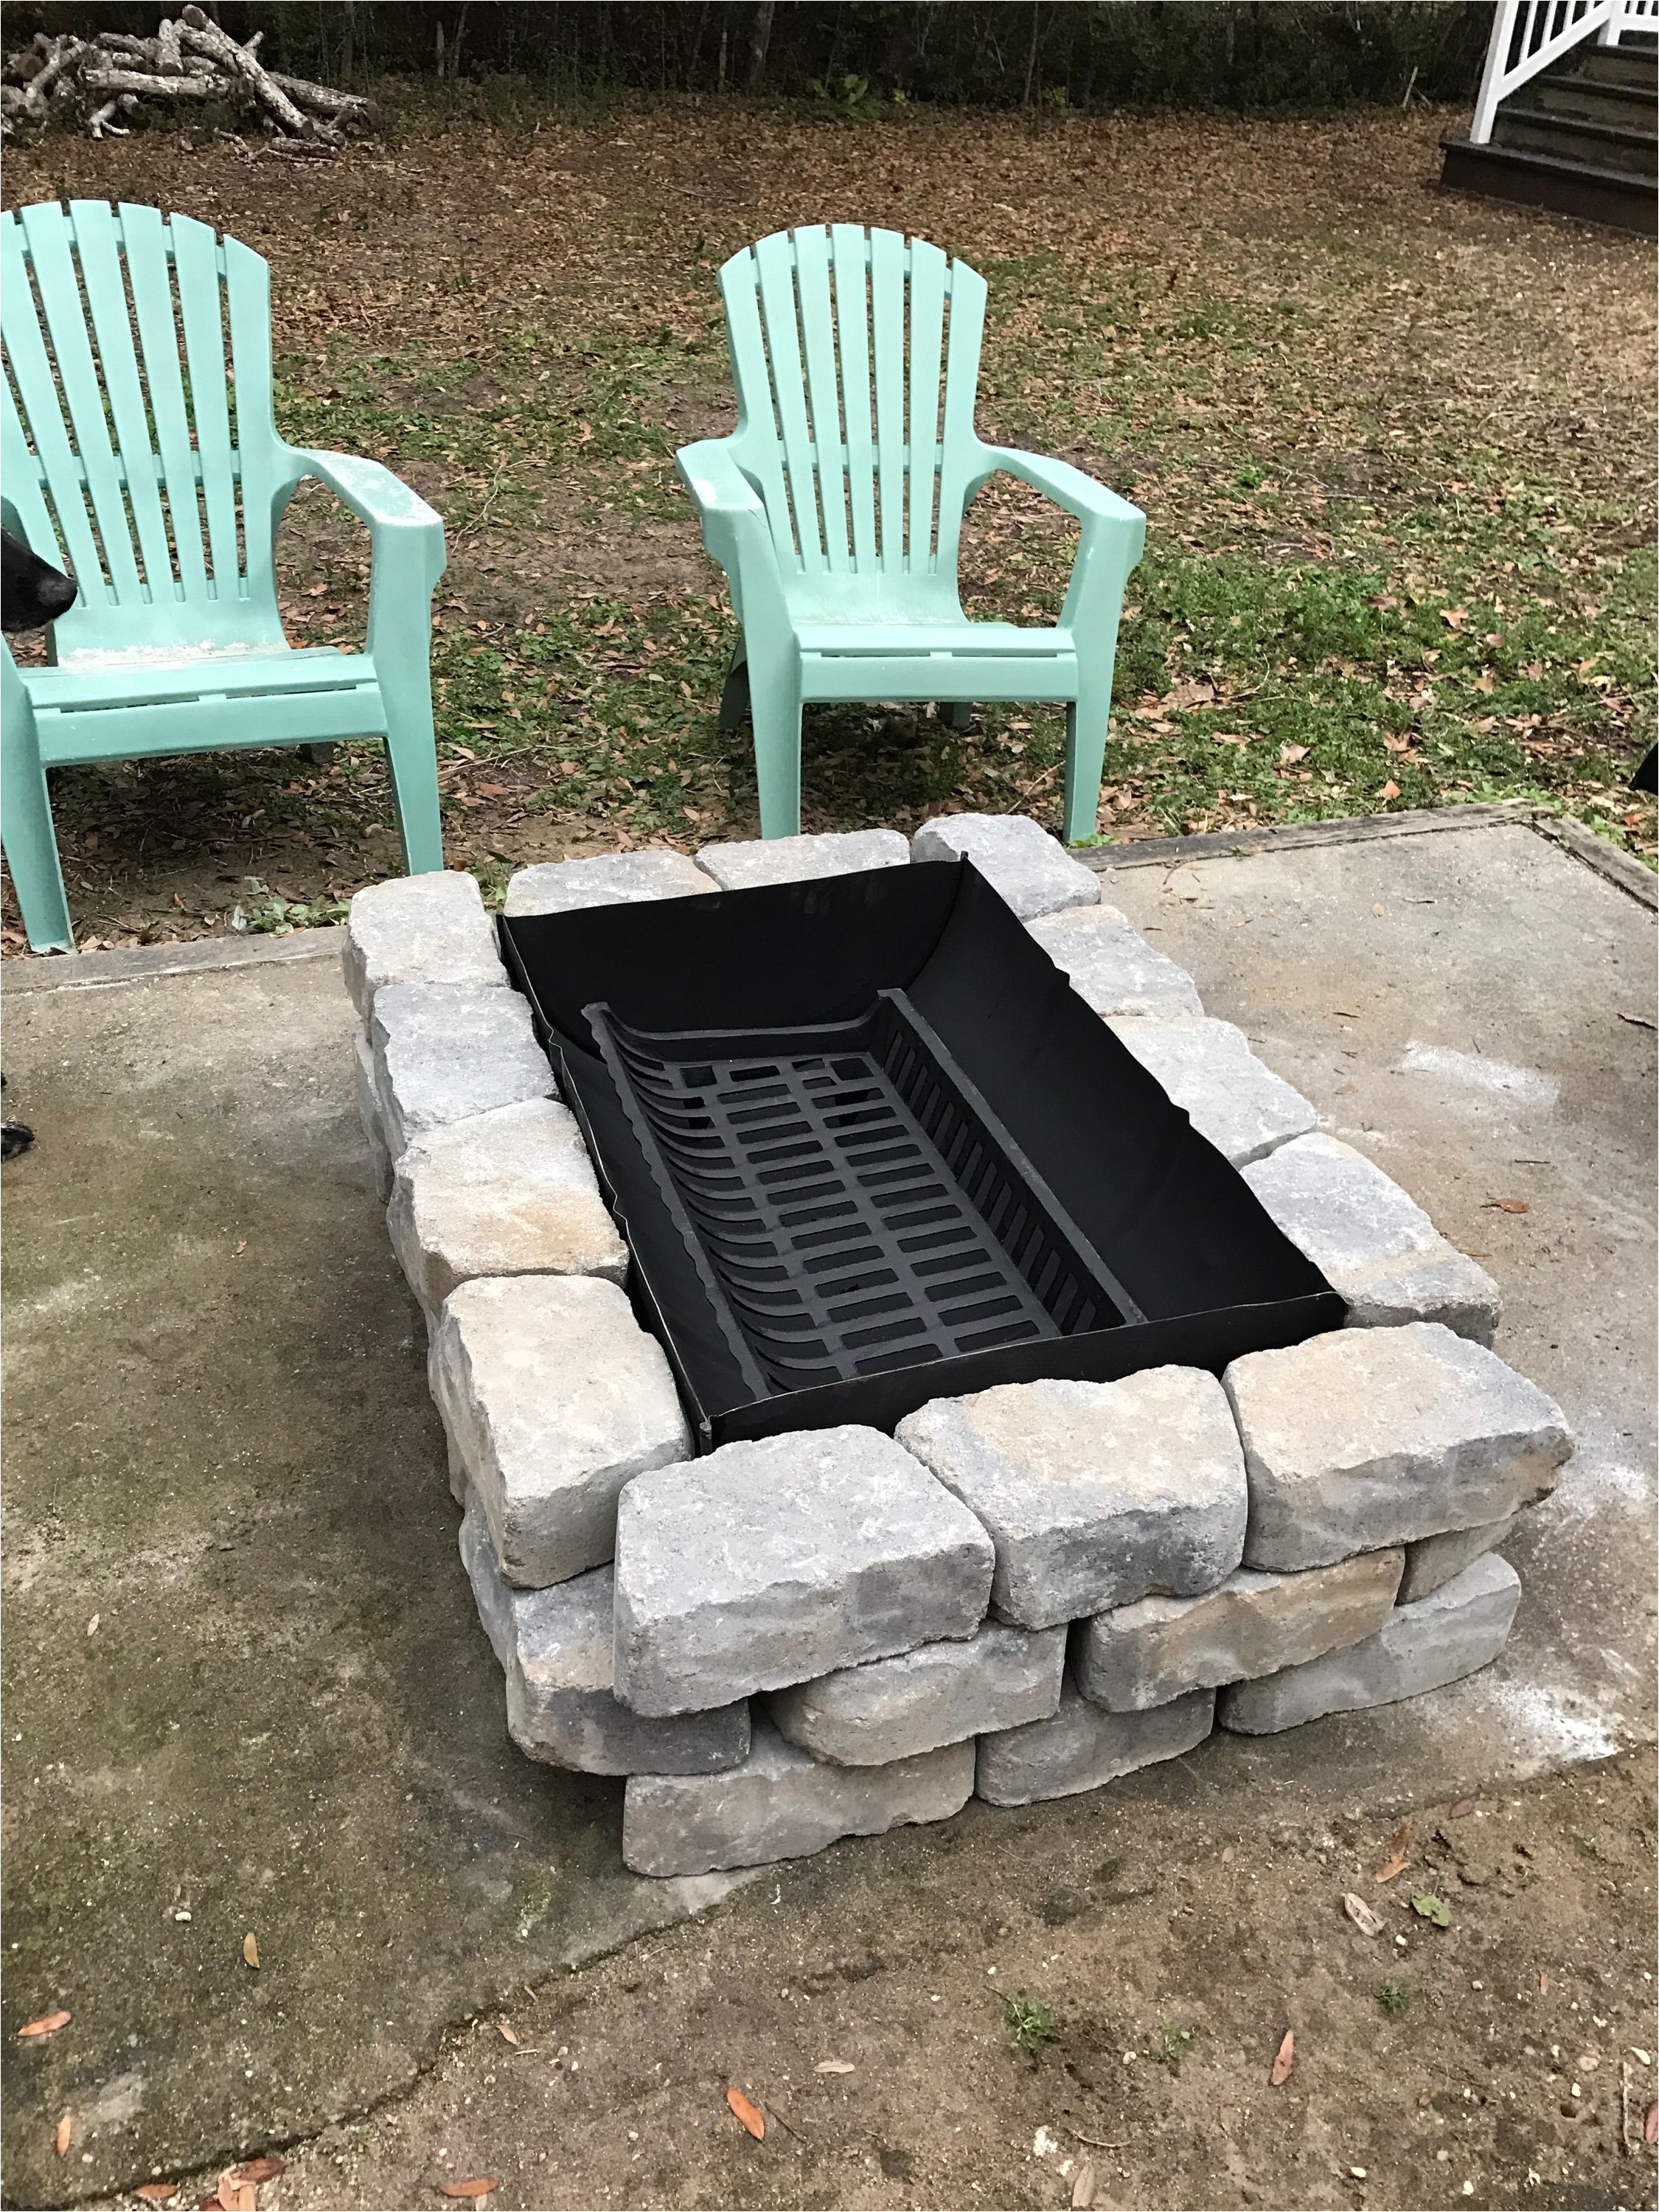 55 Gallon Drum Fireplace Kit Inexpensive Fire Pit Made From A 55 Gallon Drum A Grate From